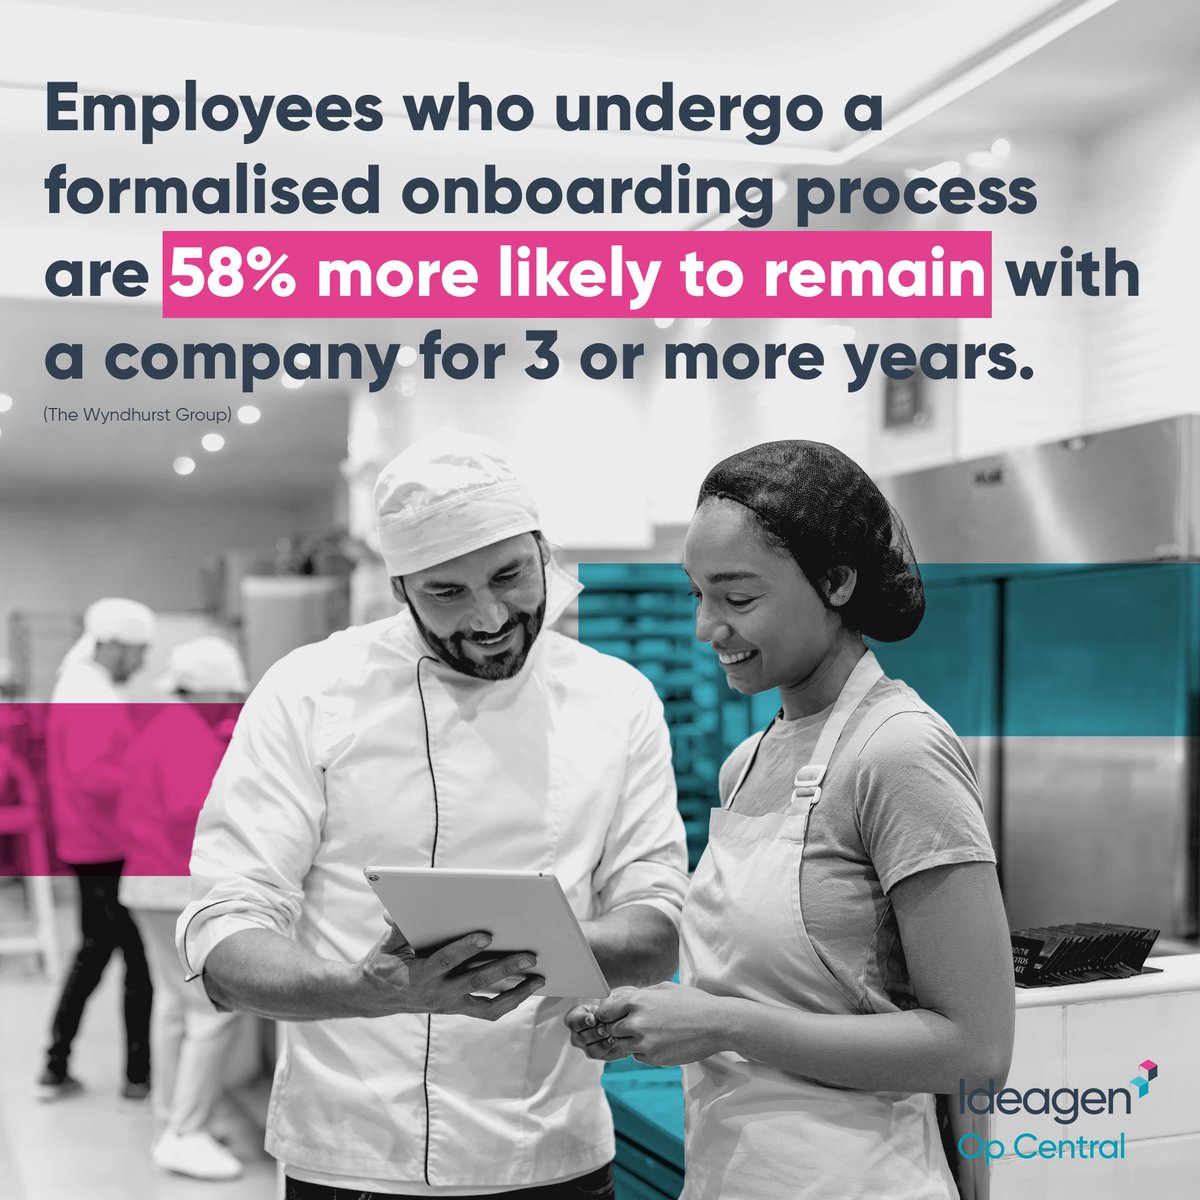 Transform your onboarding process with Ideagen Op Central's intuitive software, ensuring engaged employees stay for the long haul. Learn more: bit.ly/49umdwN